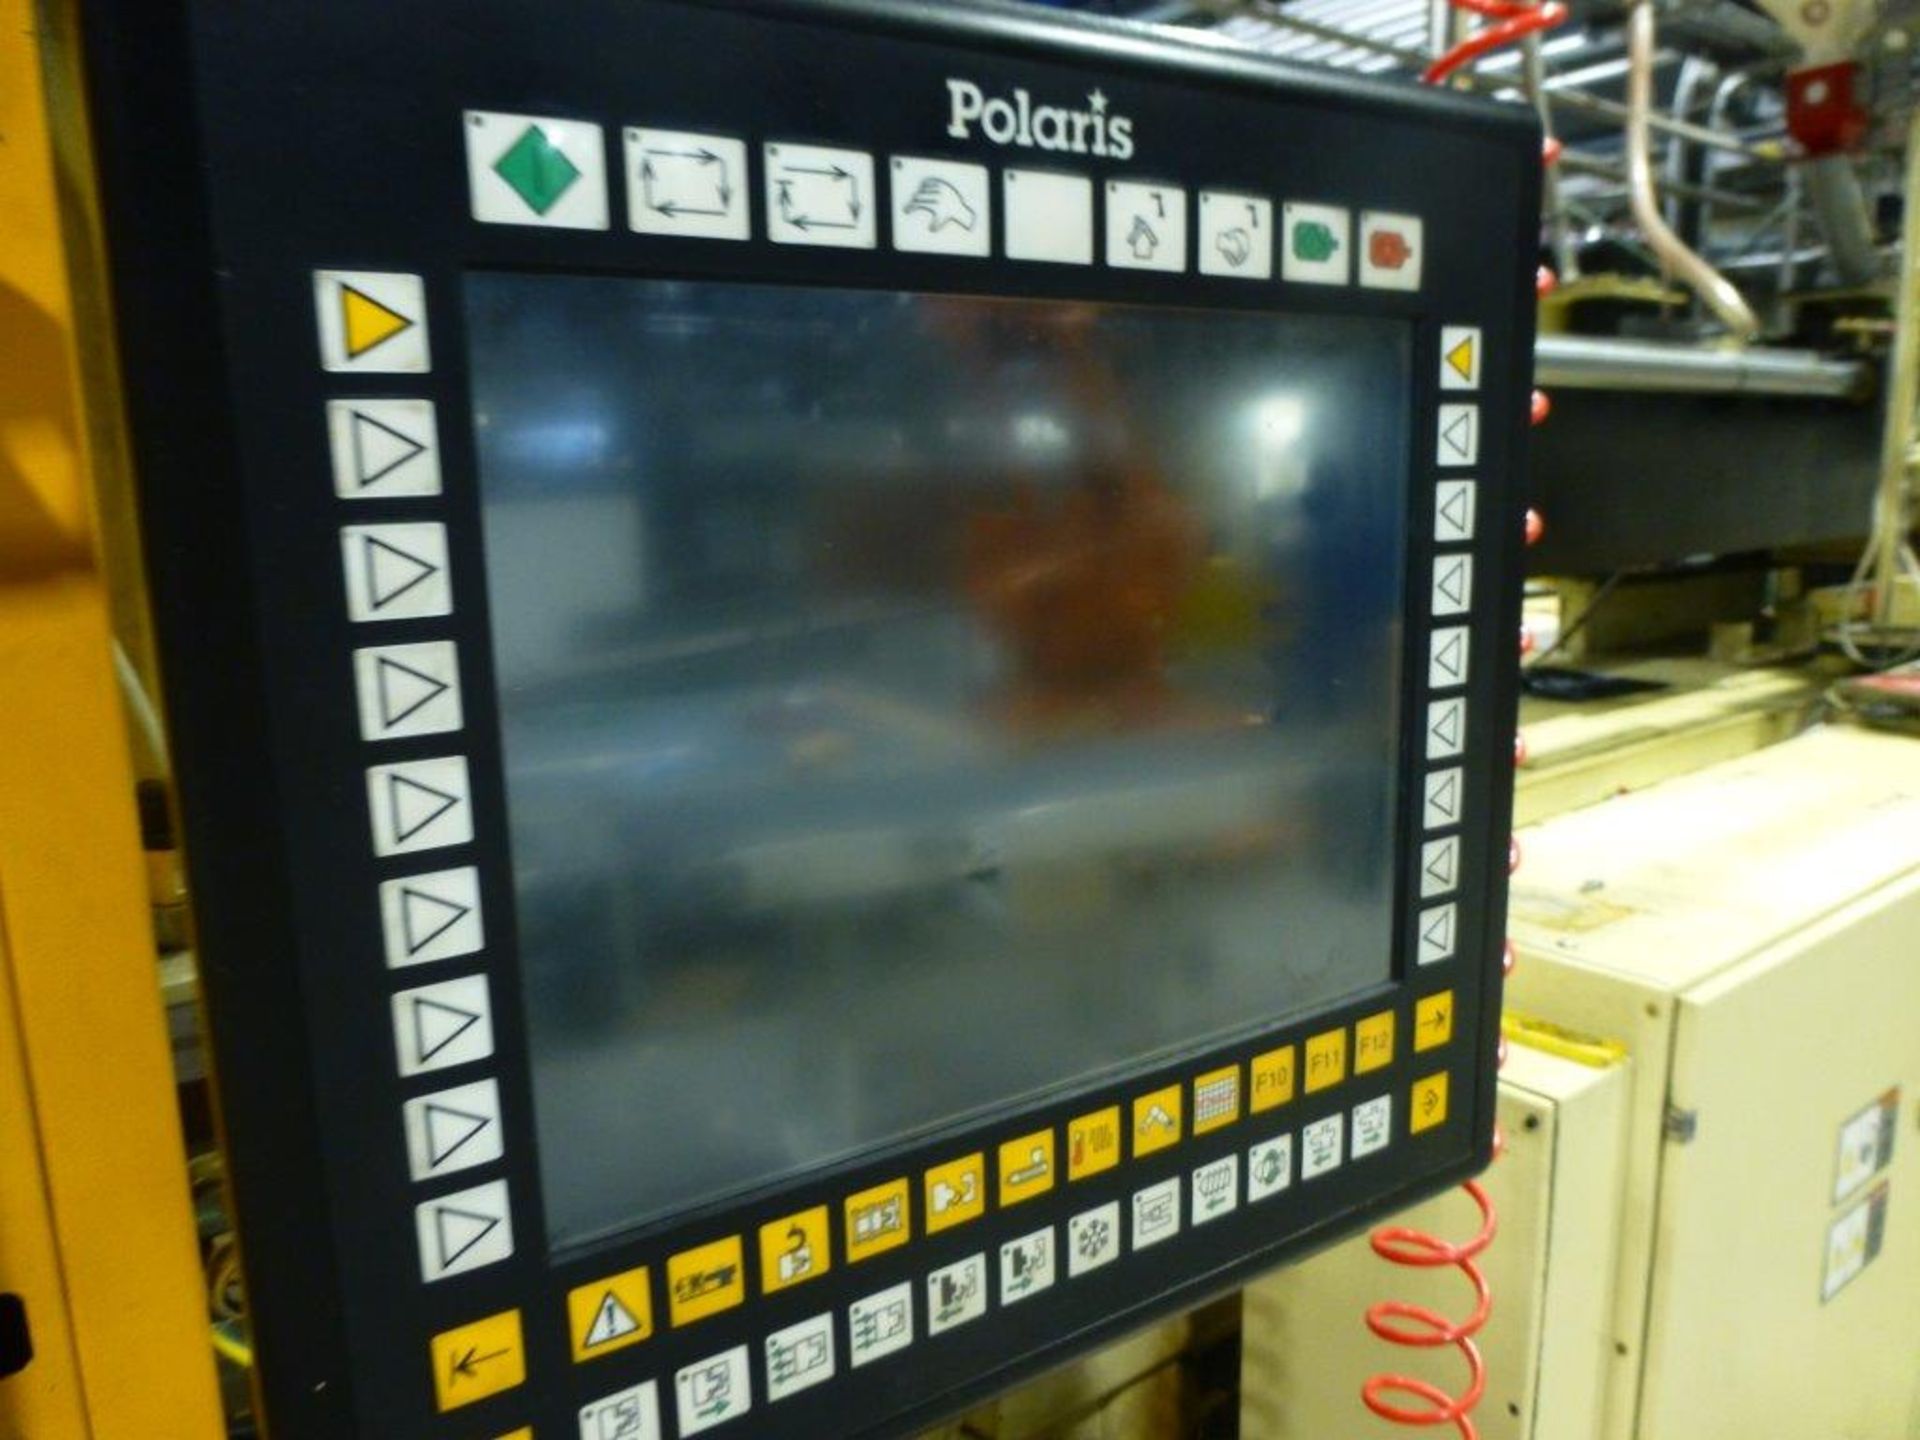 Husky H600 RS135/115 CNC Plastic Injection Moulding Machine Serial No. 3061084 (2005) with Polaris - Image 3 of 5